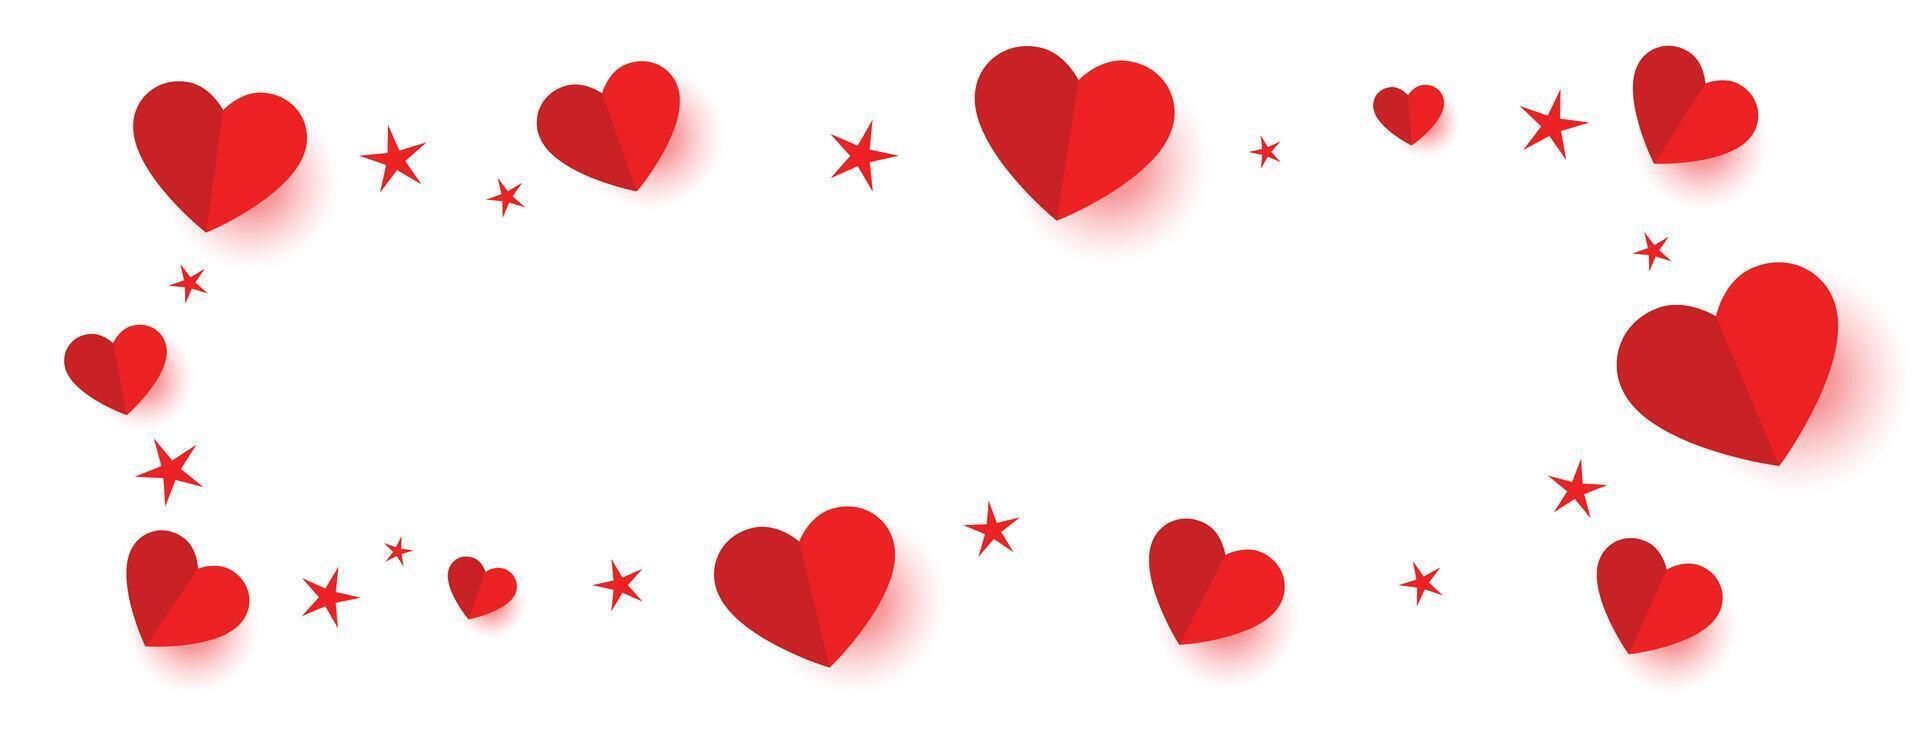 red hearts and stars frame banner with text space vector